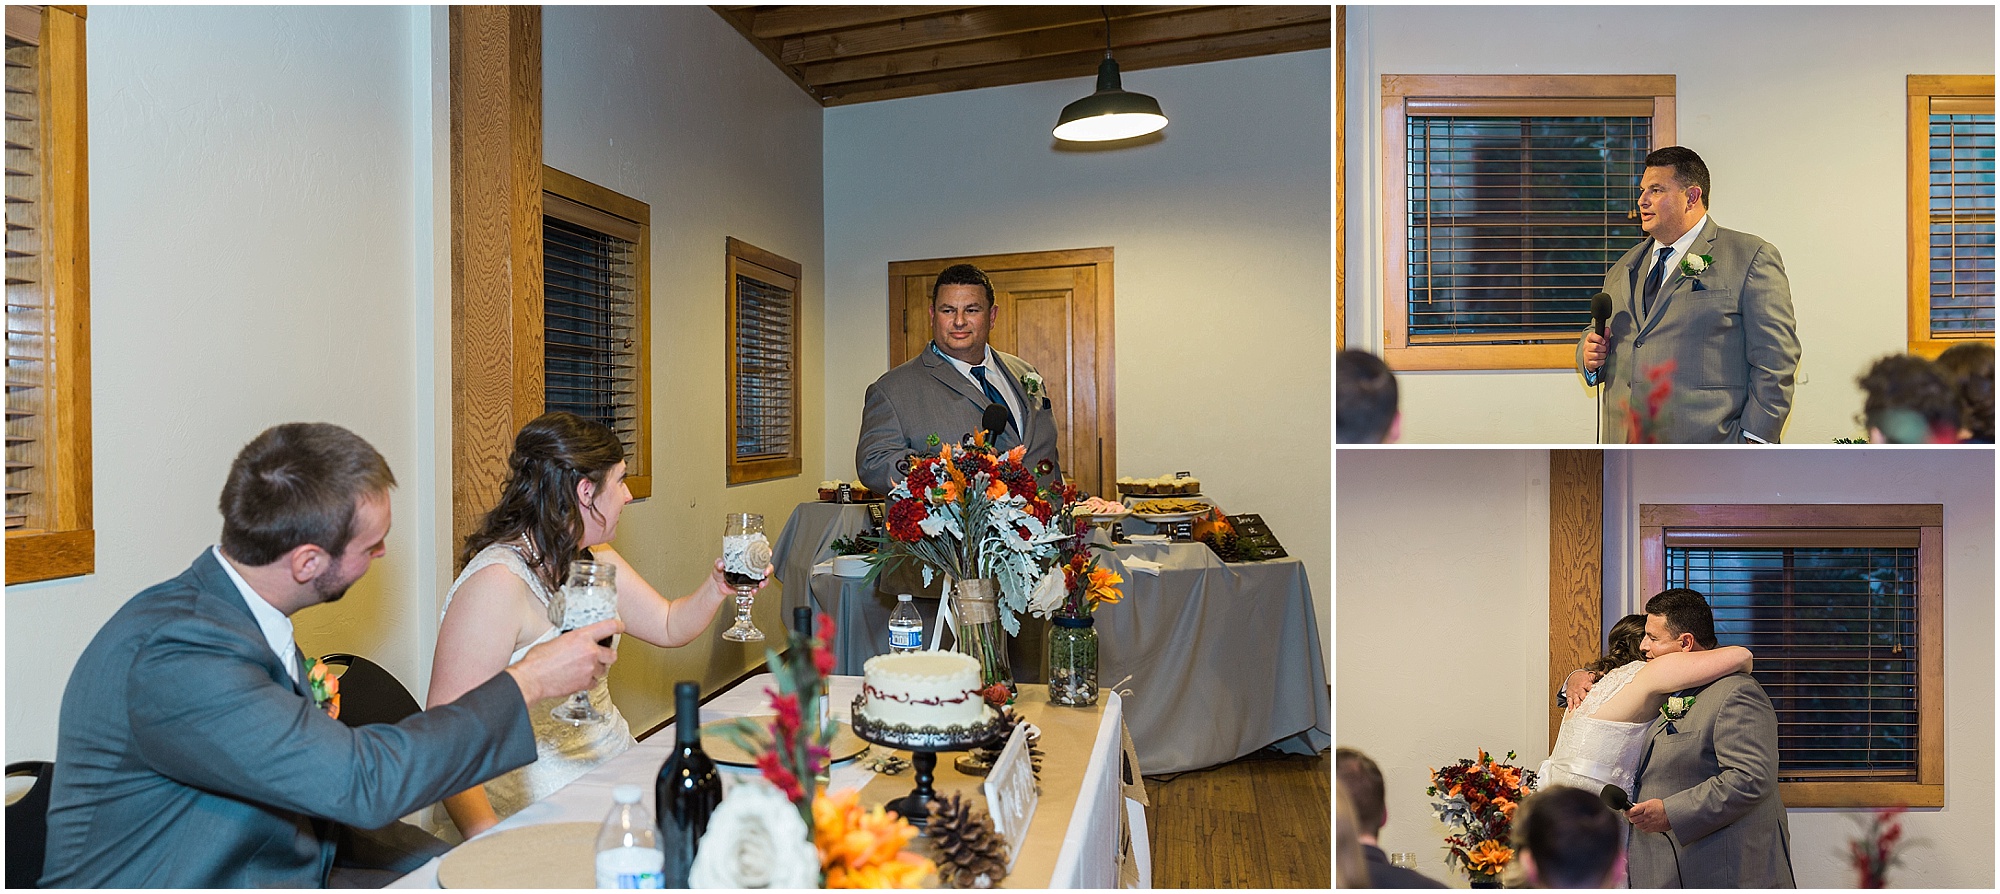 Wedding toasts to the bride & groom at this Hollinshead Barn fall wedding in Bend, Oregon. | Erica Swantek Photography